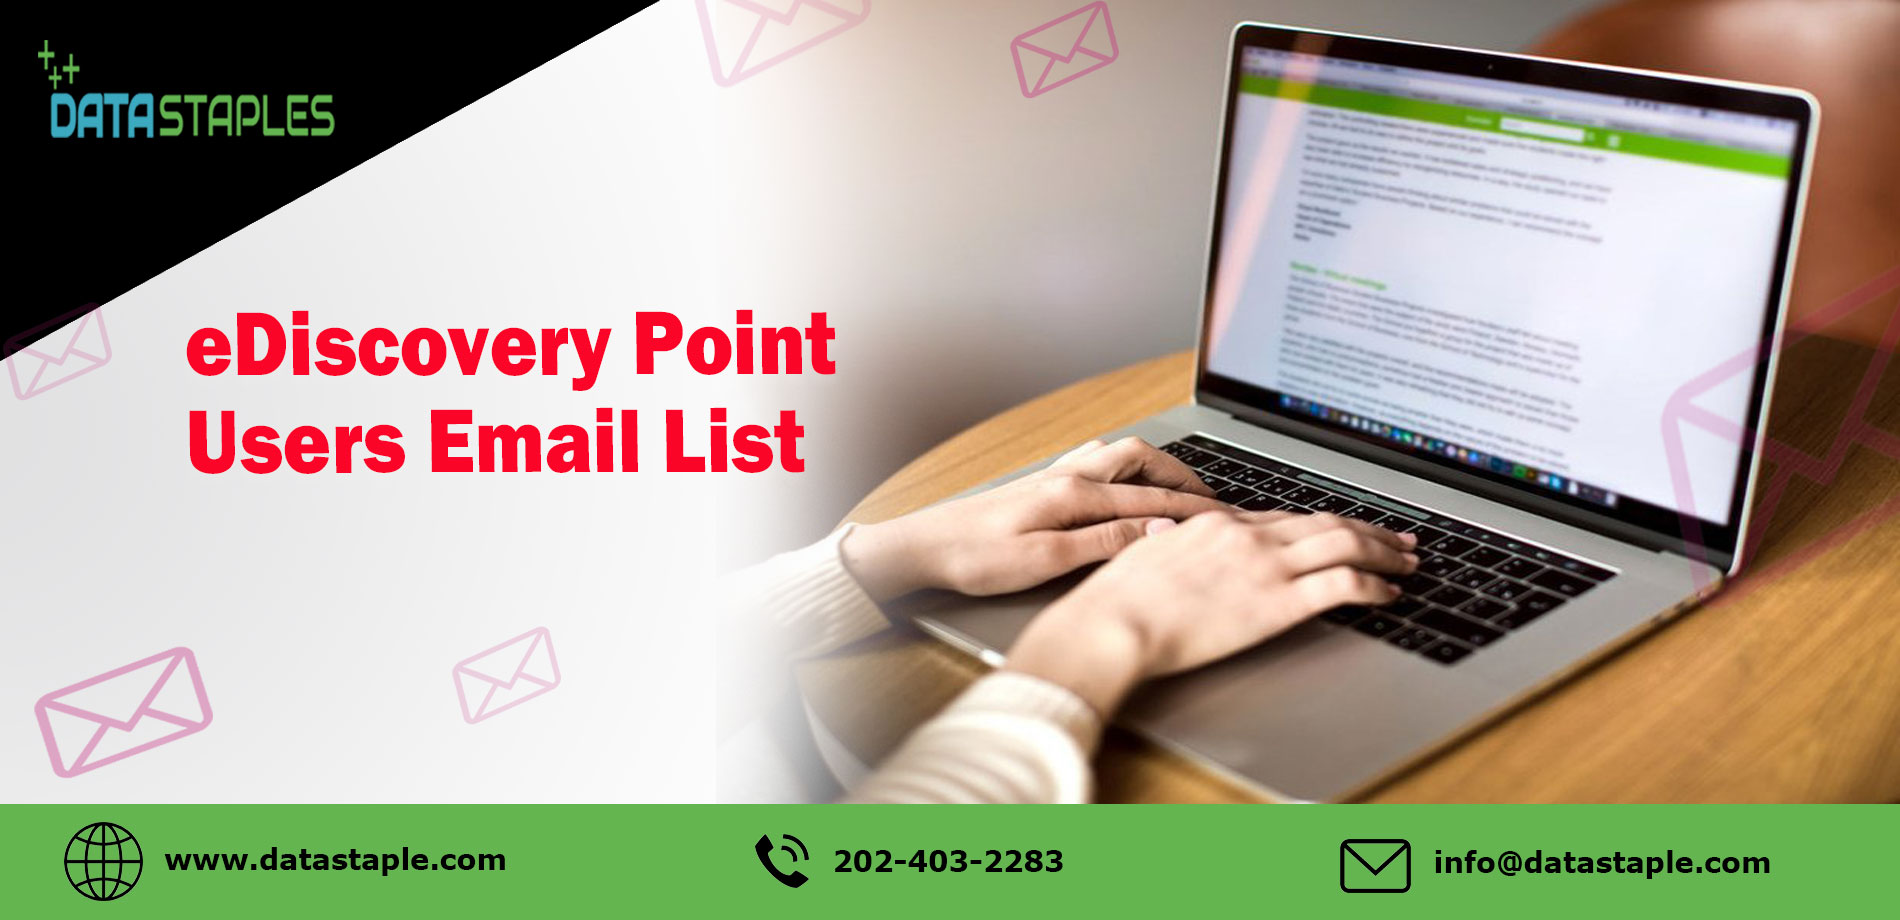 eDiscovery Point Users Email List | DataStaple